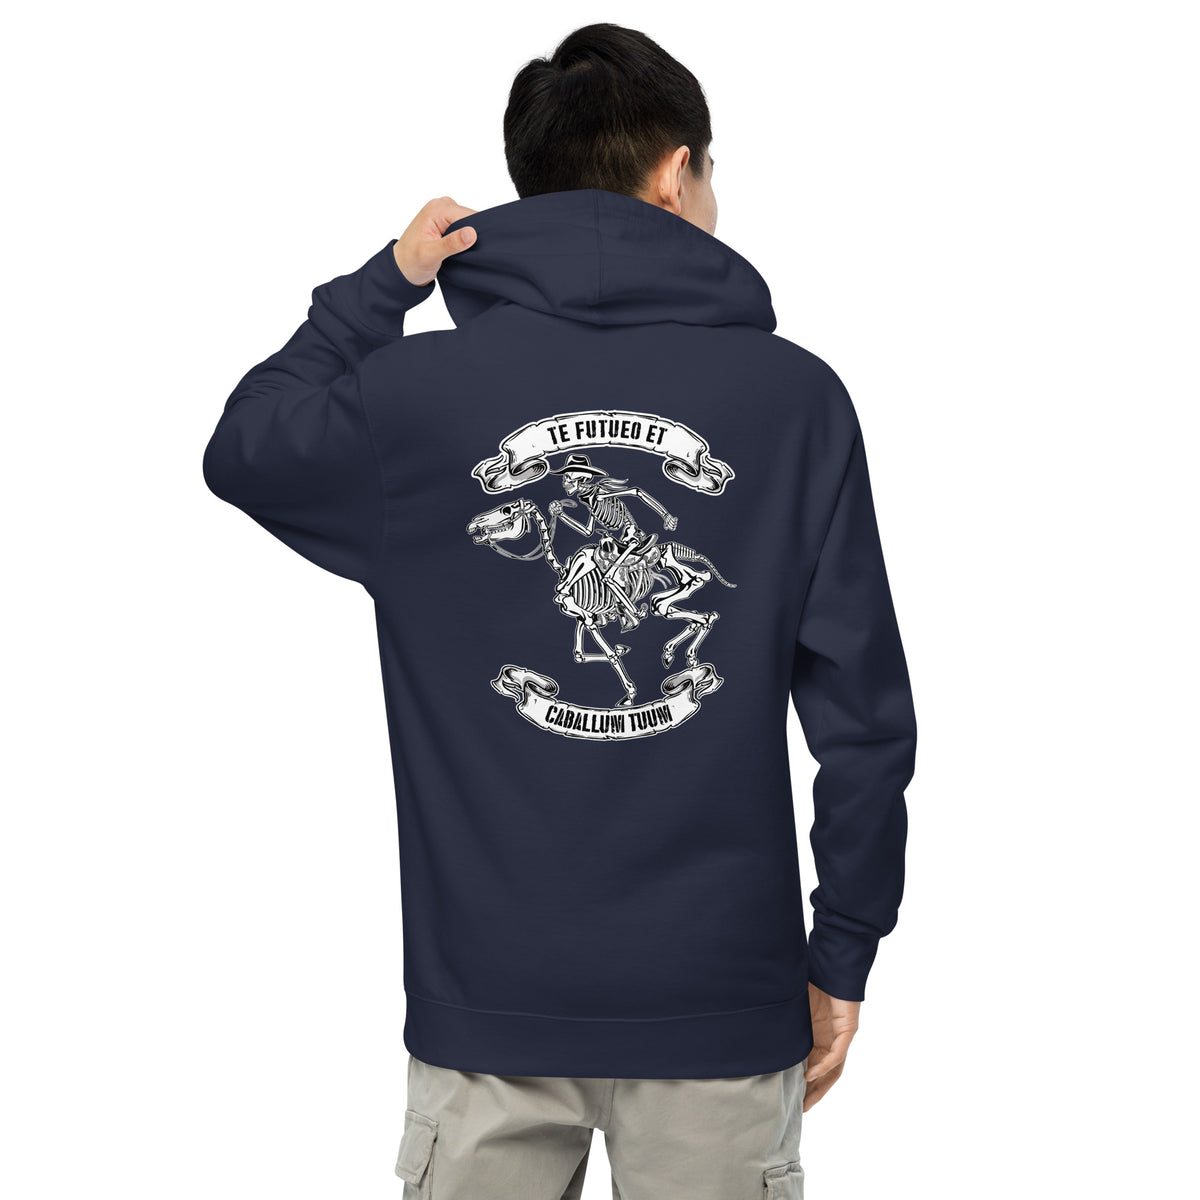 Te futueo et caballum tuum (Latin-F@*k You And The Horse You Rode In On) Unisex midweight hoodie